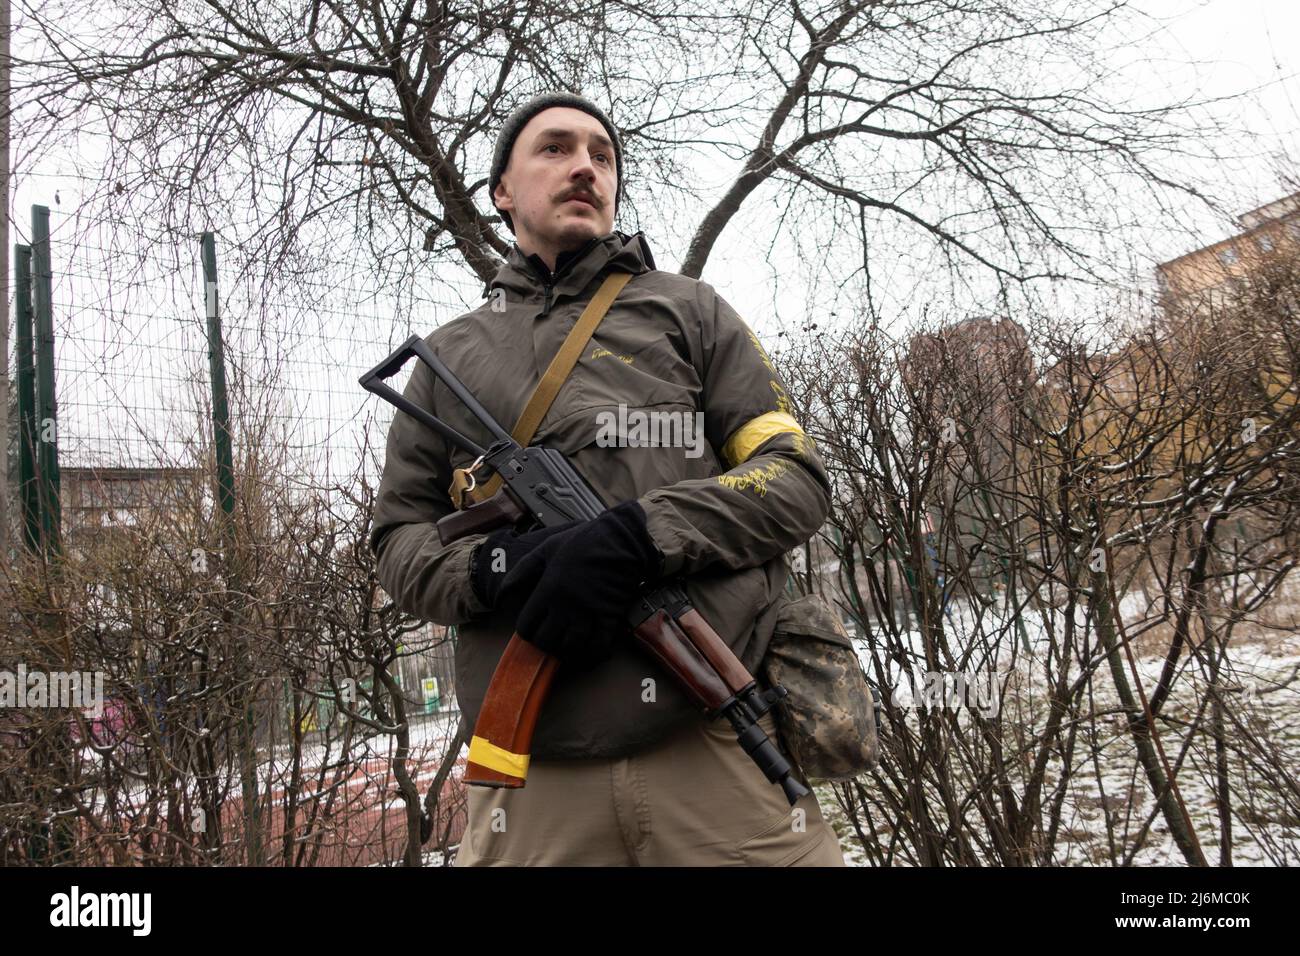 KYIV, UKRAINE 01 March. A member of the Territorial defense forces stands guard with a Kalashnikov rifle as Russia's invasion of Ukraine continues on 01 March 2022 in Kiev, Ukraine. Russia began a military invasion of Ukraine after Russia's parliament approved treaties with two breakaway regions in eastern Ukraine. It is the largest military conflict in Europe since World War II. Stock Photo